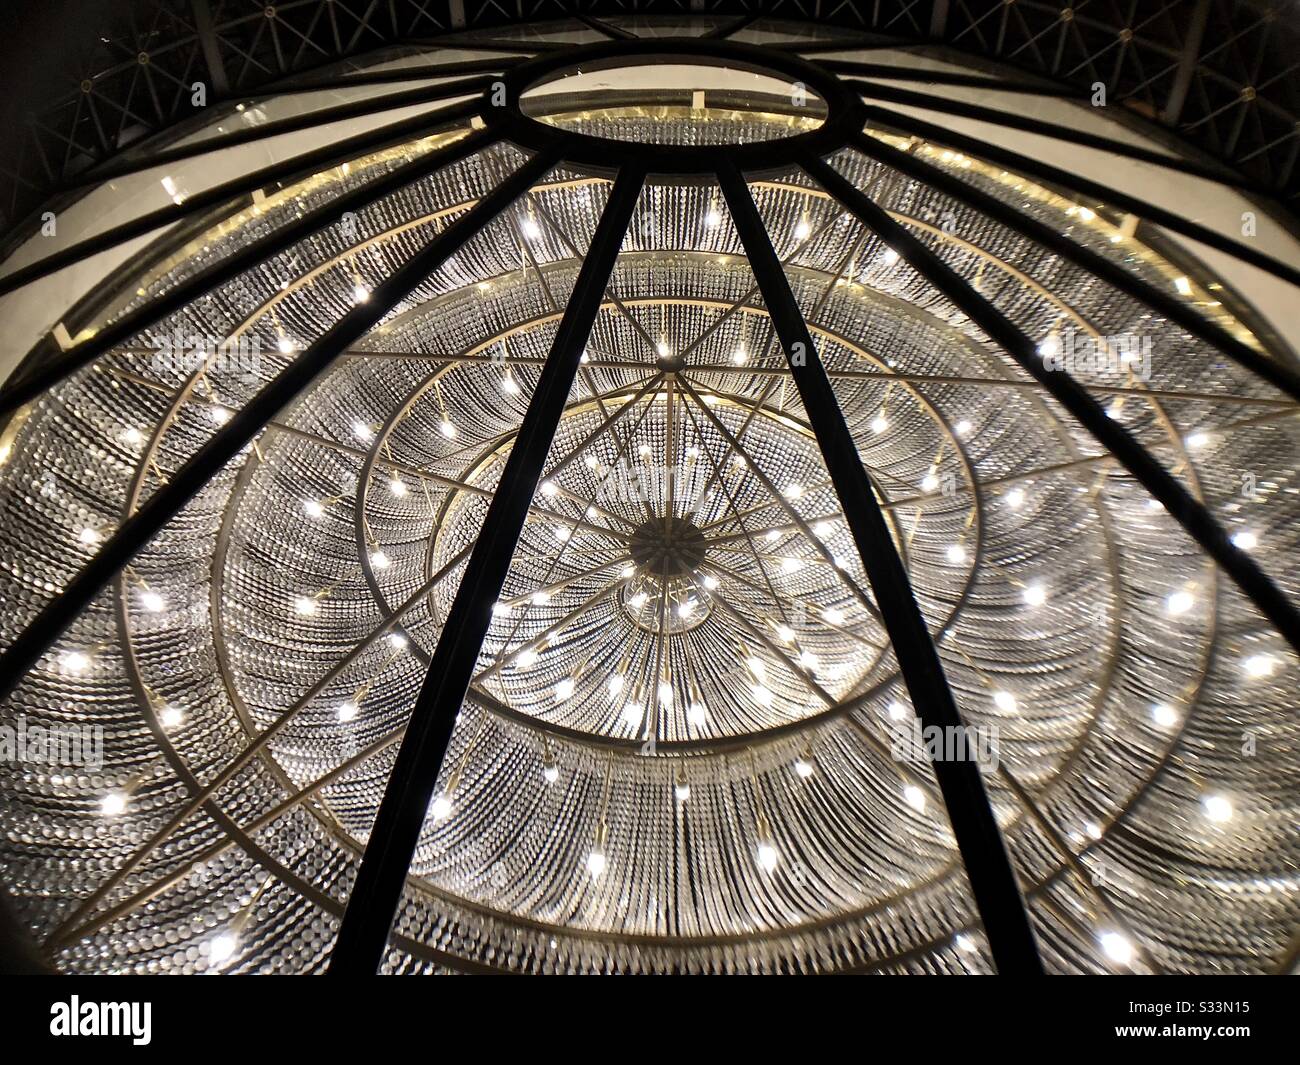 Interior dome of the floor below.  Geometric, circular, with radiating lines. Stock Photo